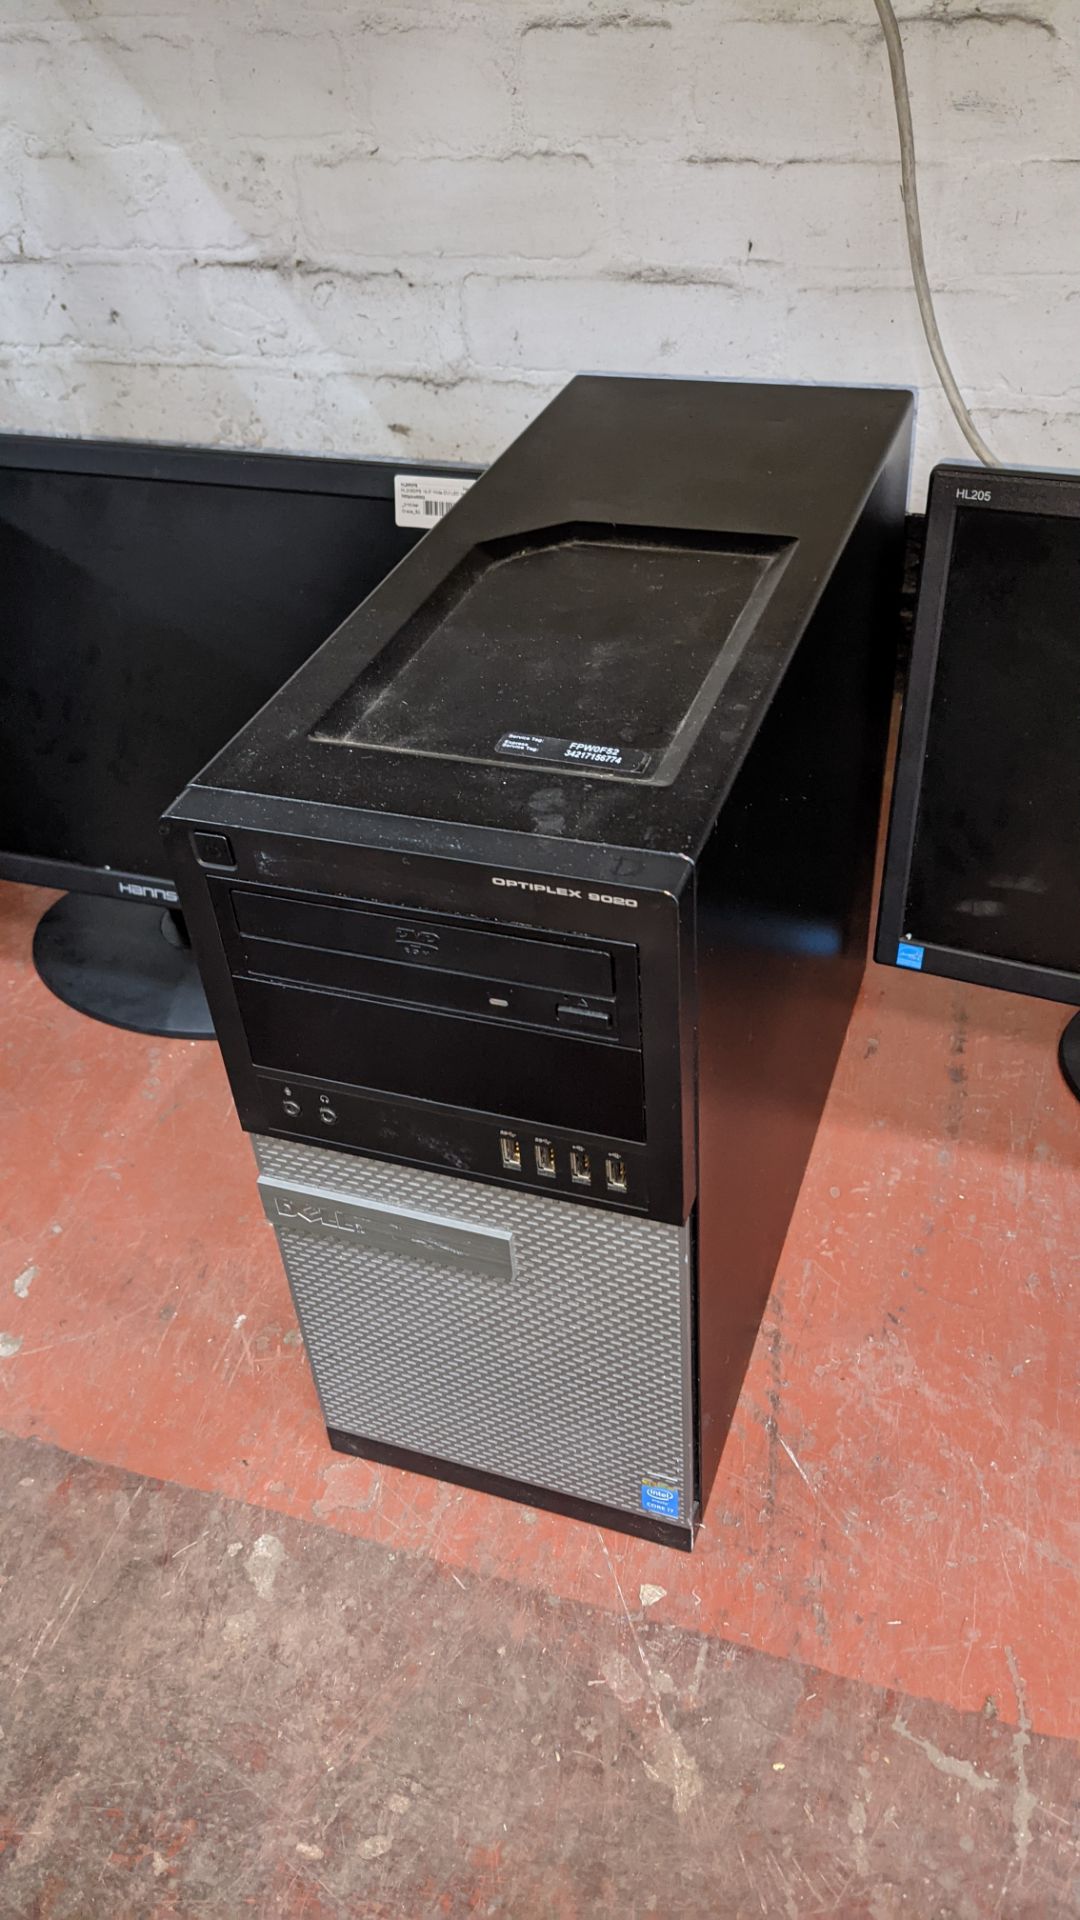 3 off Dell Optiplex assorted tower computers, each with monitor - no cables, keyboards, mice or othe - Image 4 of 10